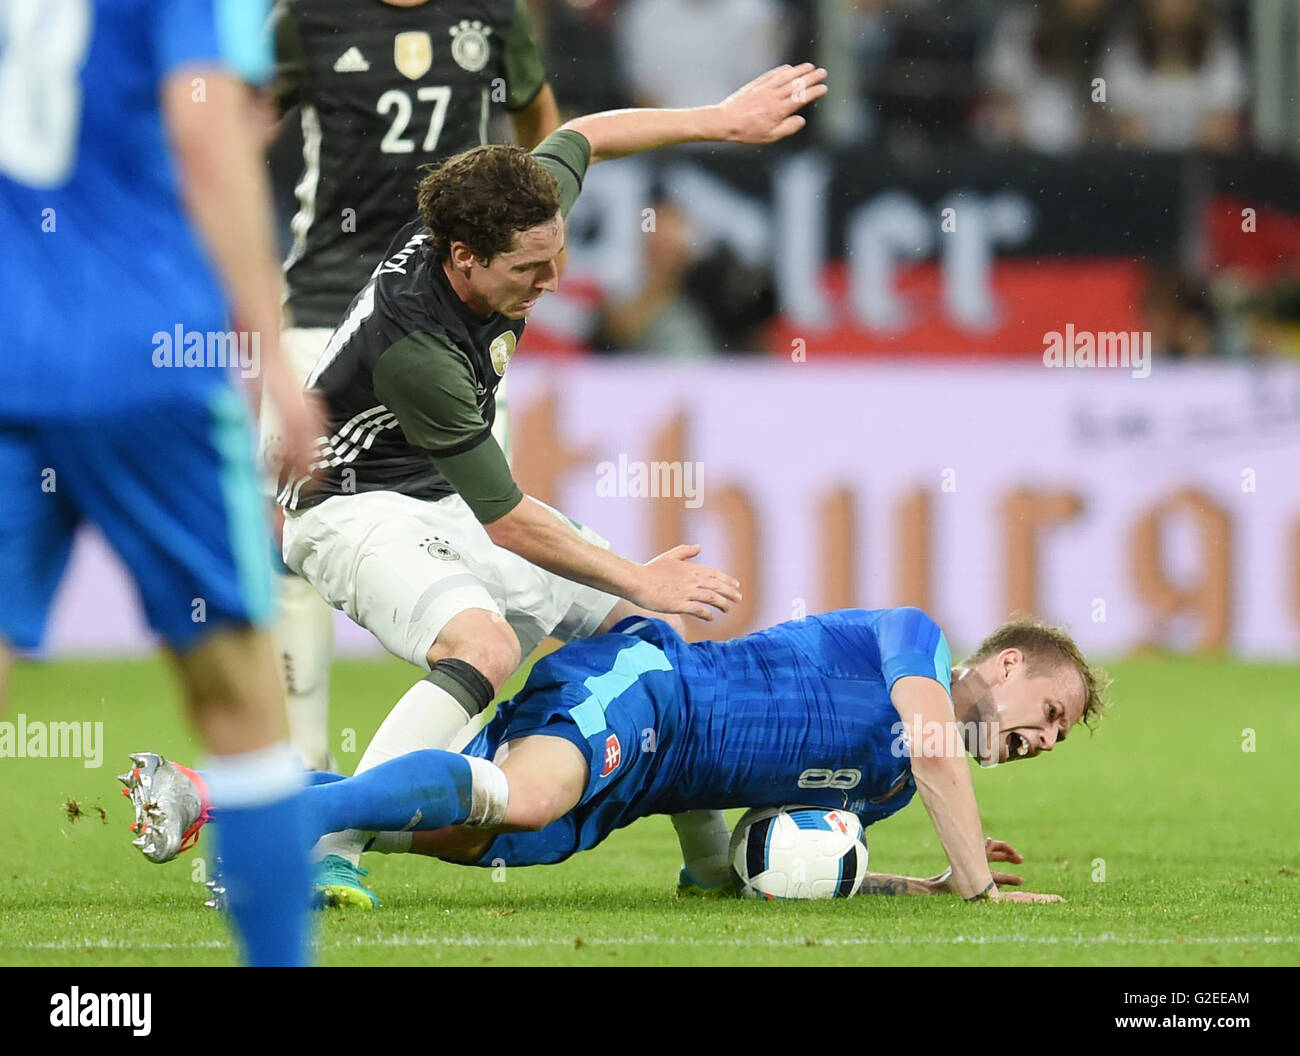 Augsburg, Germany. 29th May, 2016. Germany's Sebastian Rudy (l) and Slovakia's Ondrej Duda in action during the international friendly match between Germany and Slovakia at WWK-Arena in Augsburg, Germany, 29 May 2016. PHOTO: TOBIAS HASE/dpa/Alamy Live News Stock Photo